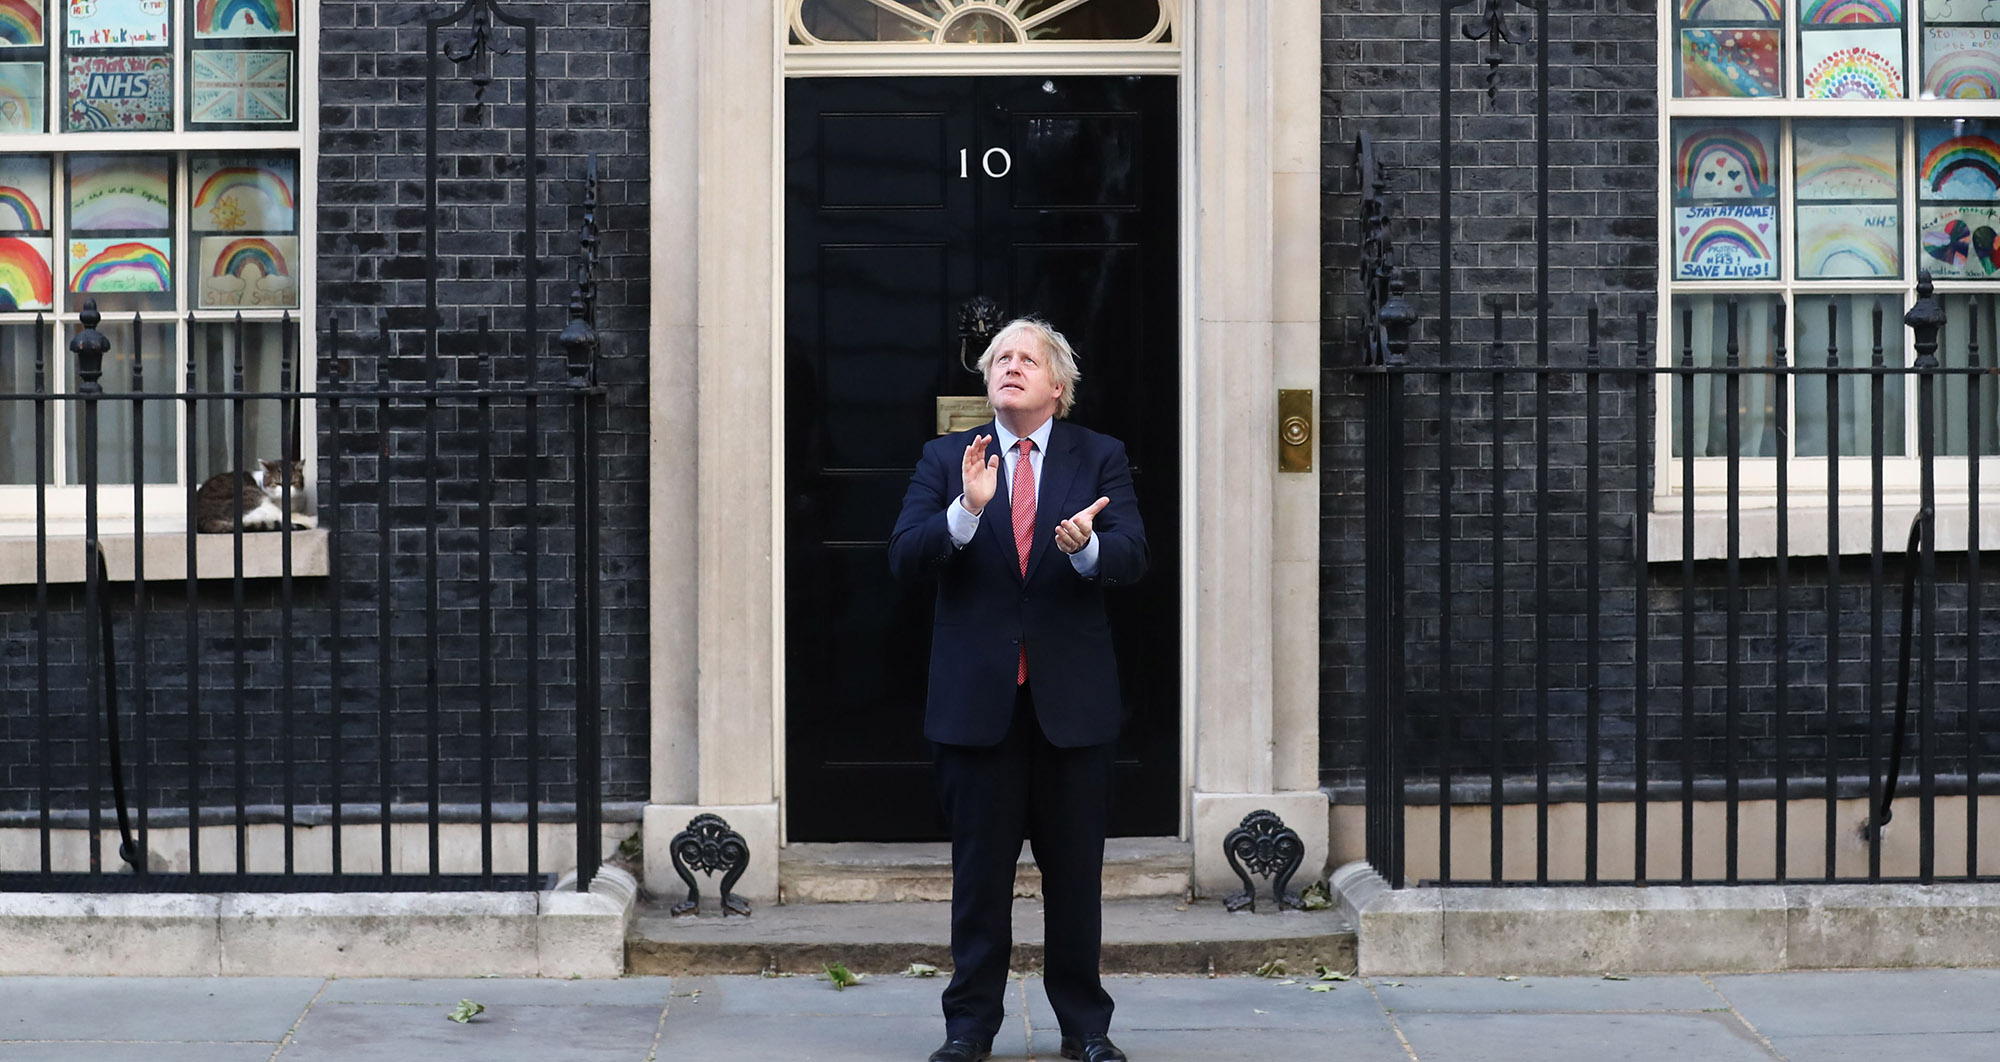 Boris Johnson claps while standing outside 10 Downing Street during a national round of applause to show appreciation for health workers in London on&nbsp;June 28.&nbsp;